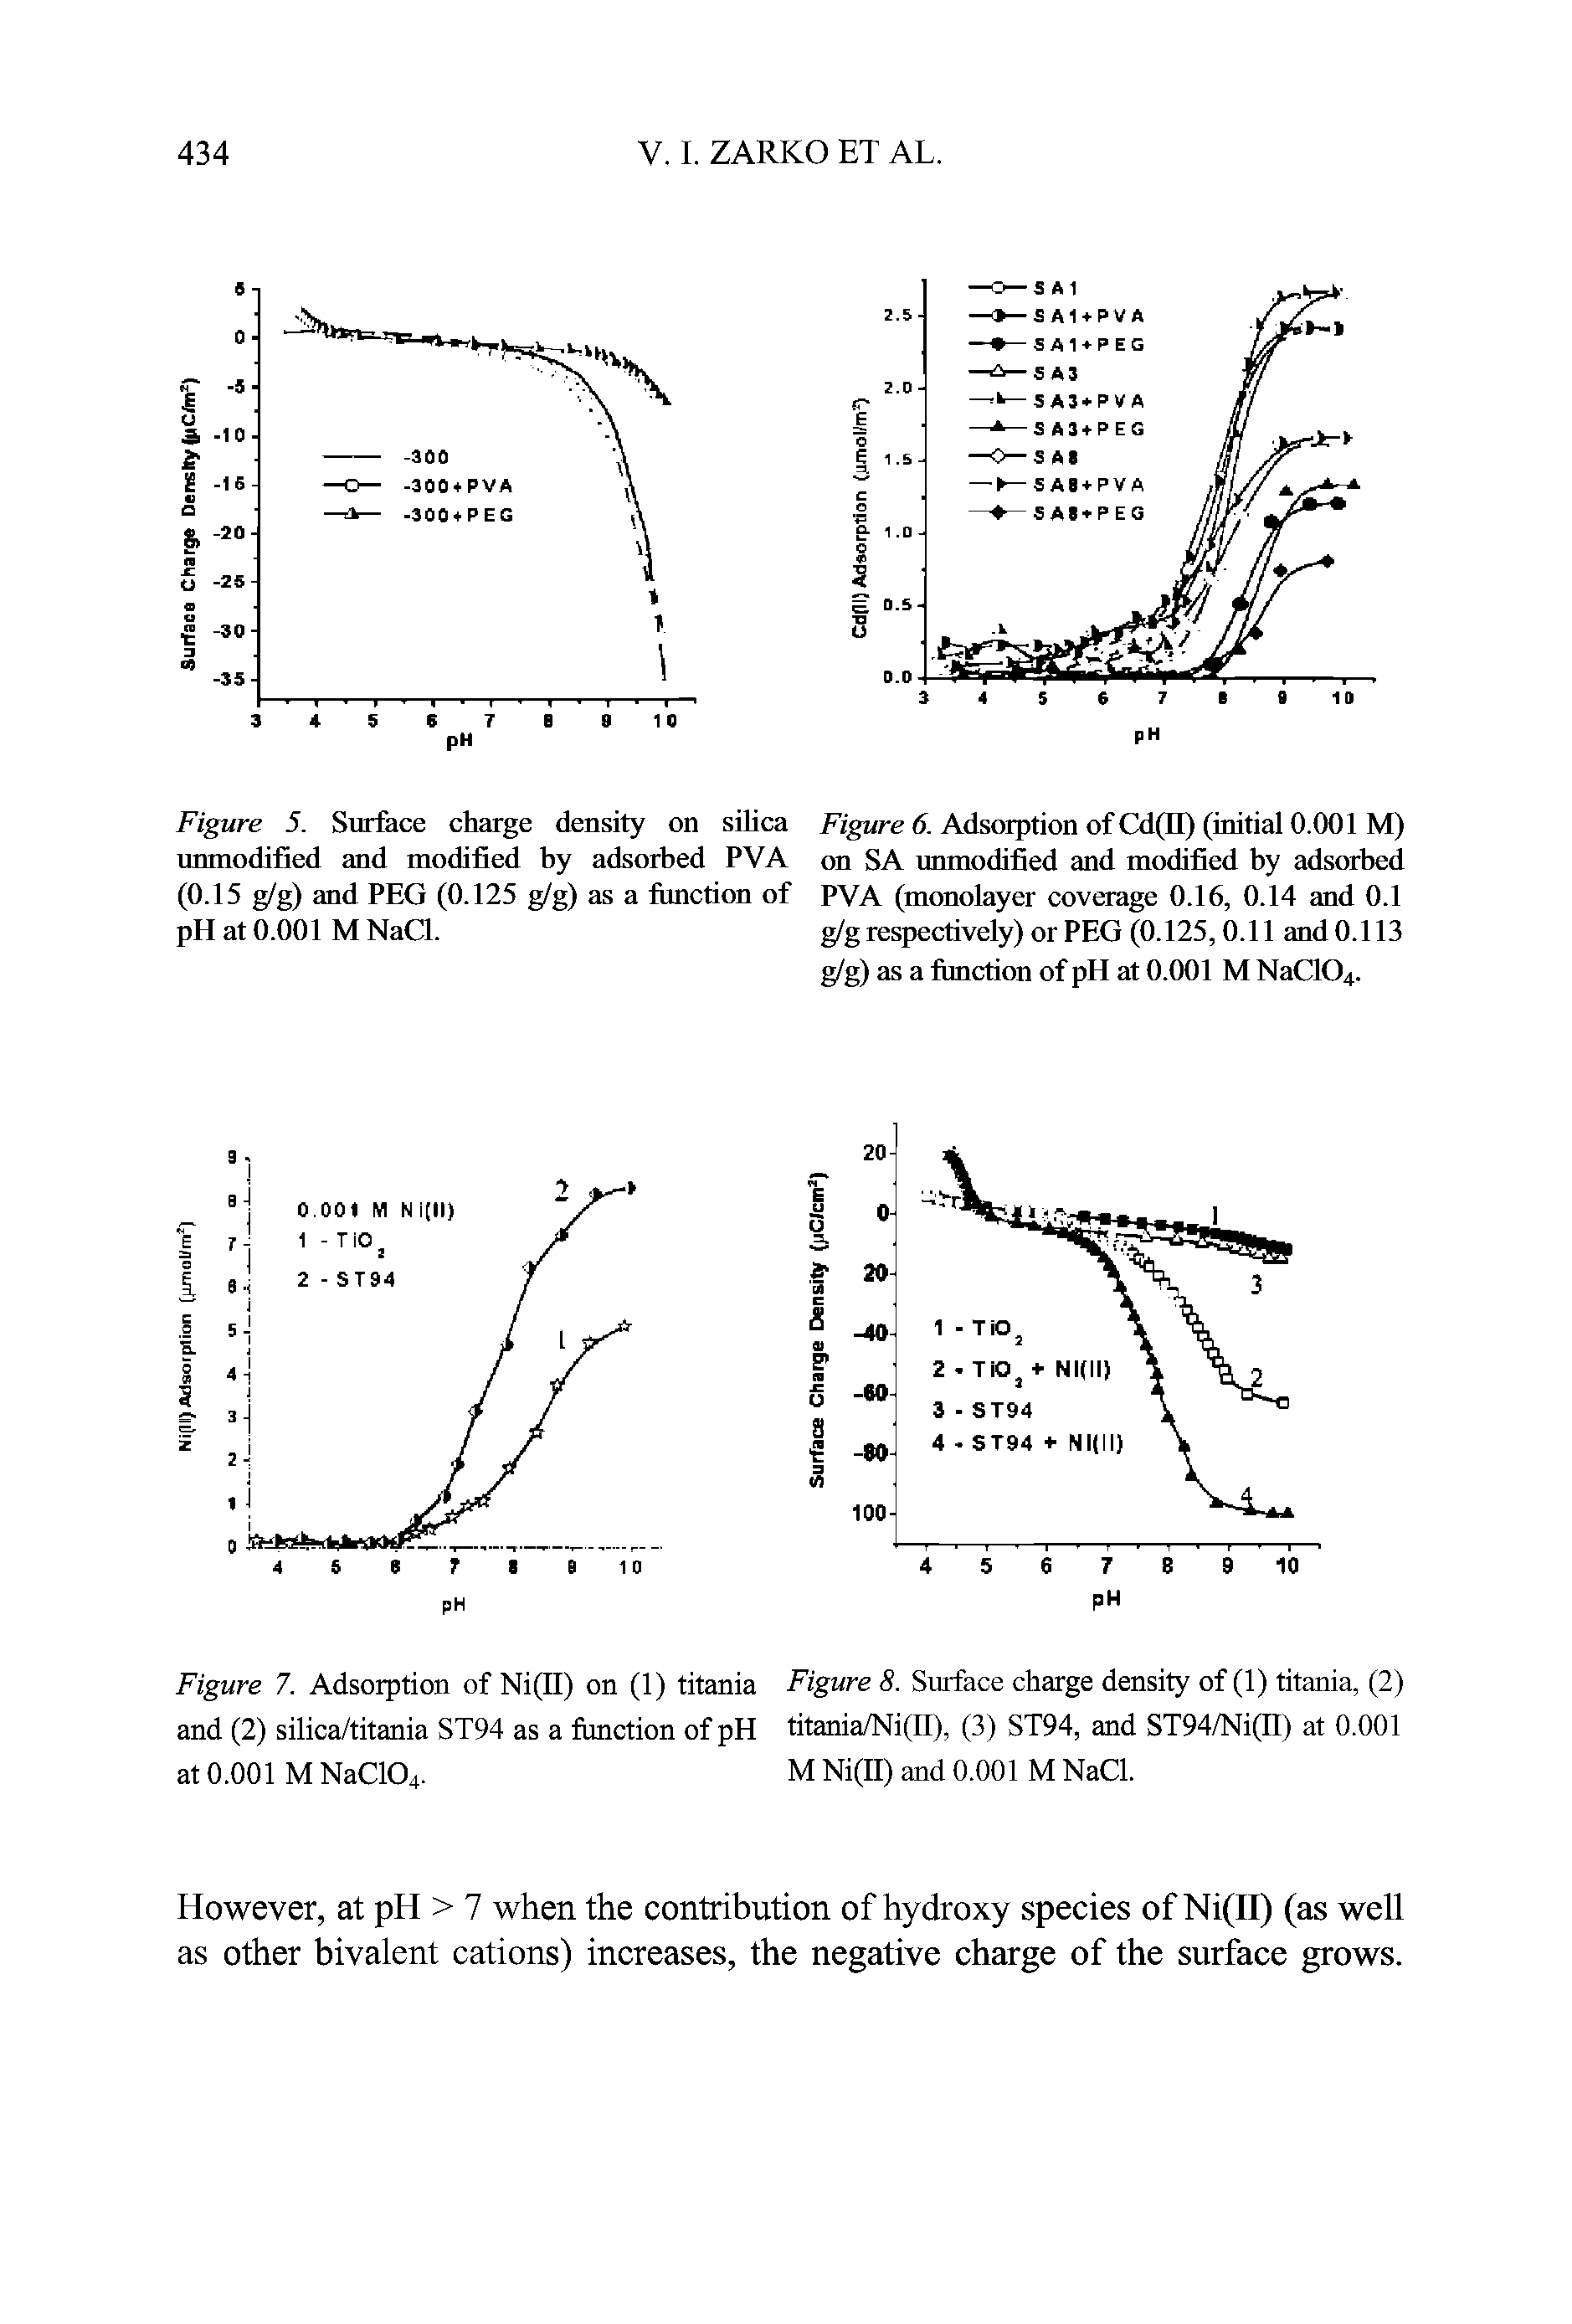 Figure 5. Surface charge density on silica unmodified and modified by adsorbed PVA (0.15 g/g) and PEG (0.125 g/g) as a function of pH at 0.001 M NaCl.